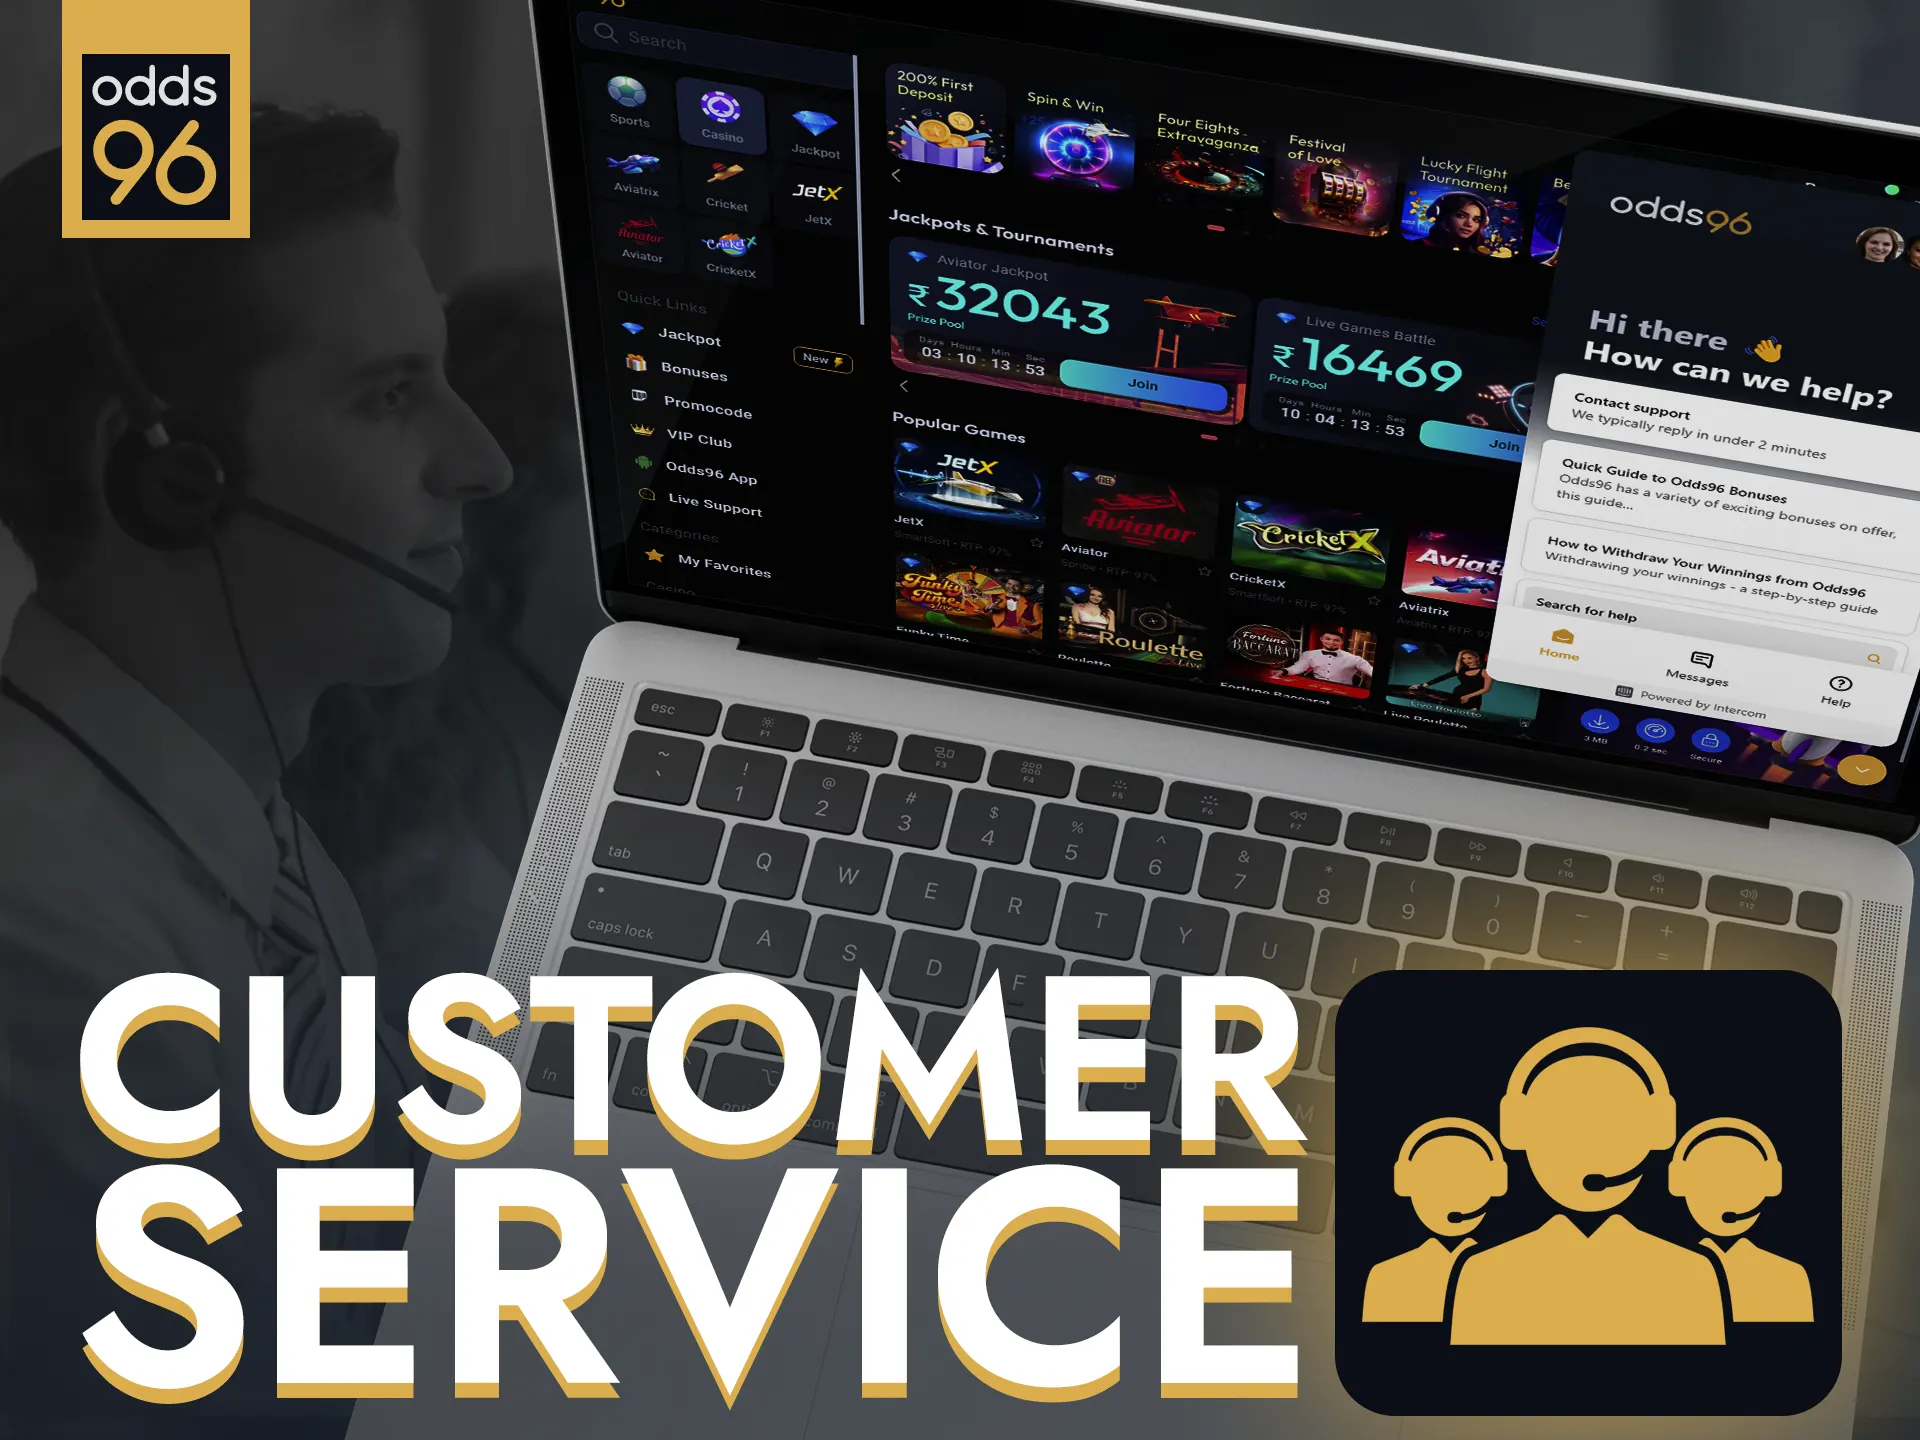 Odds96 offers 24/7 customer support via chat and email.